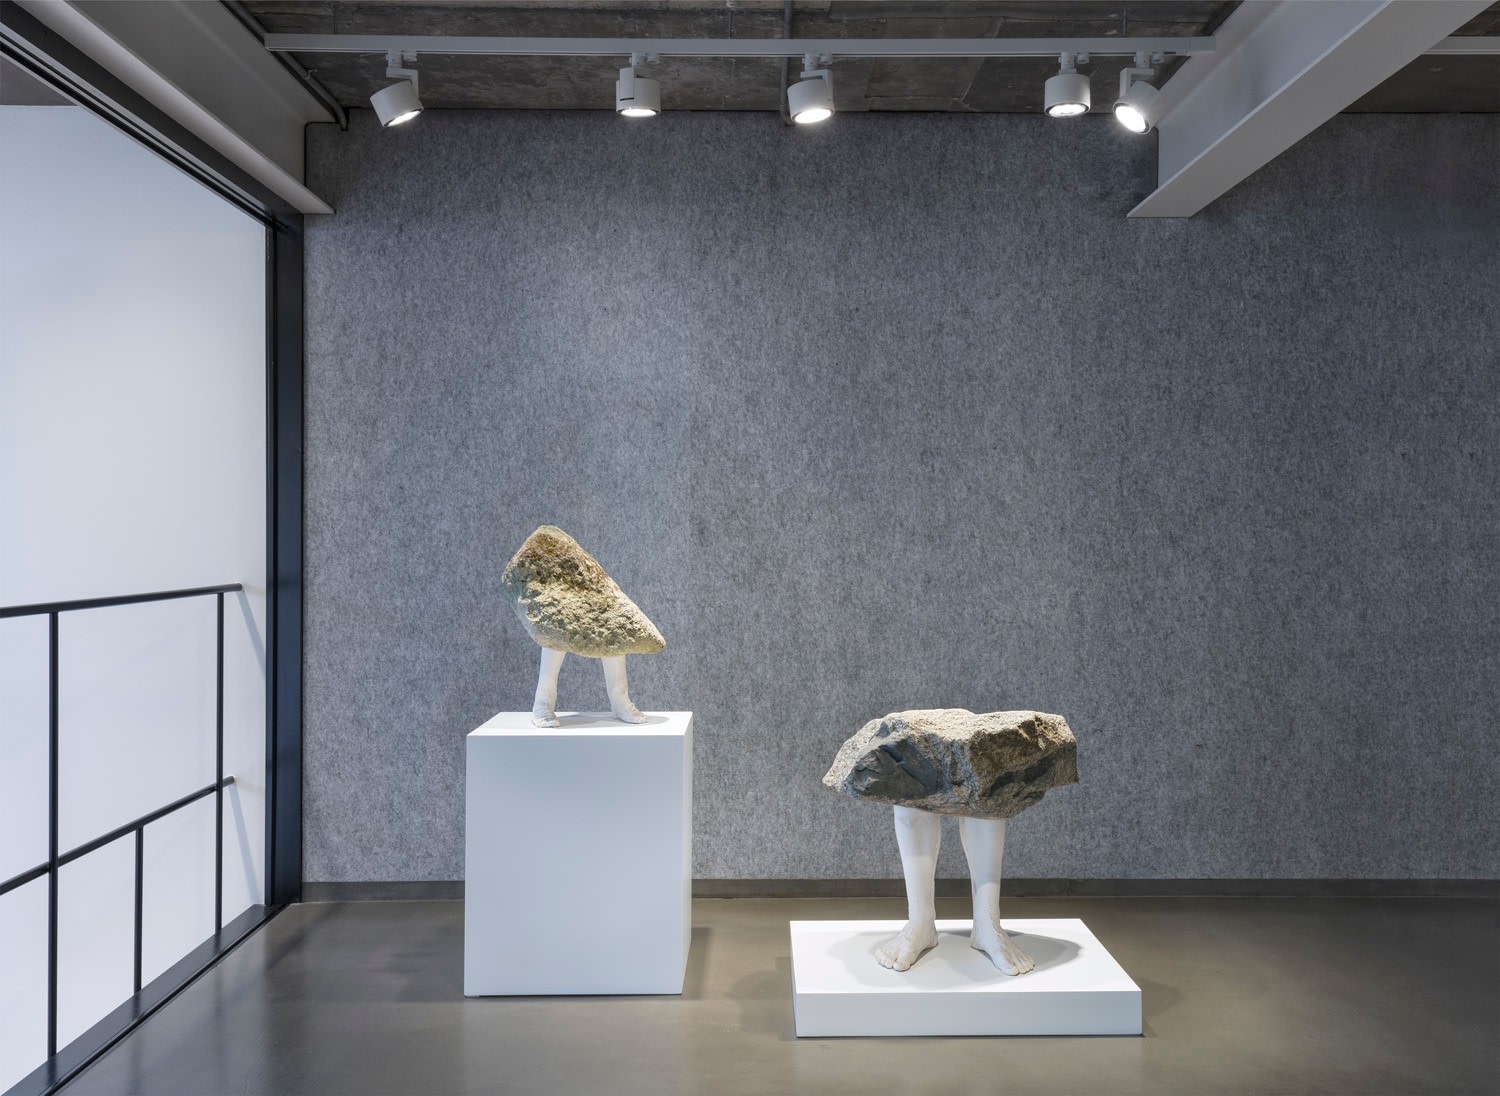 Two sculptures of rocks on legs each standing on platforms one higher than the other in front of a grey gallery wall